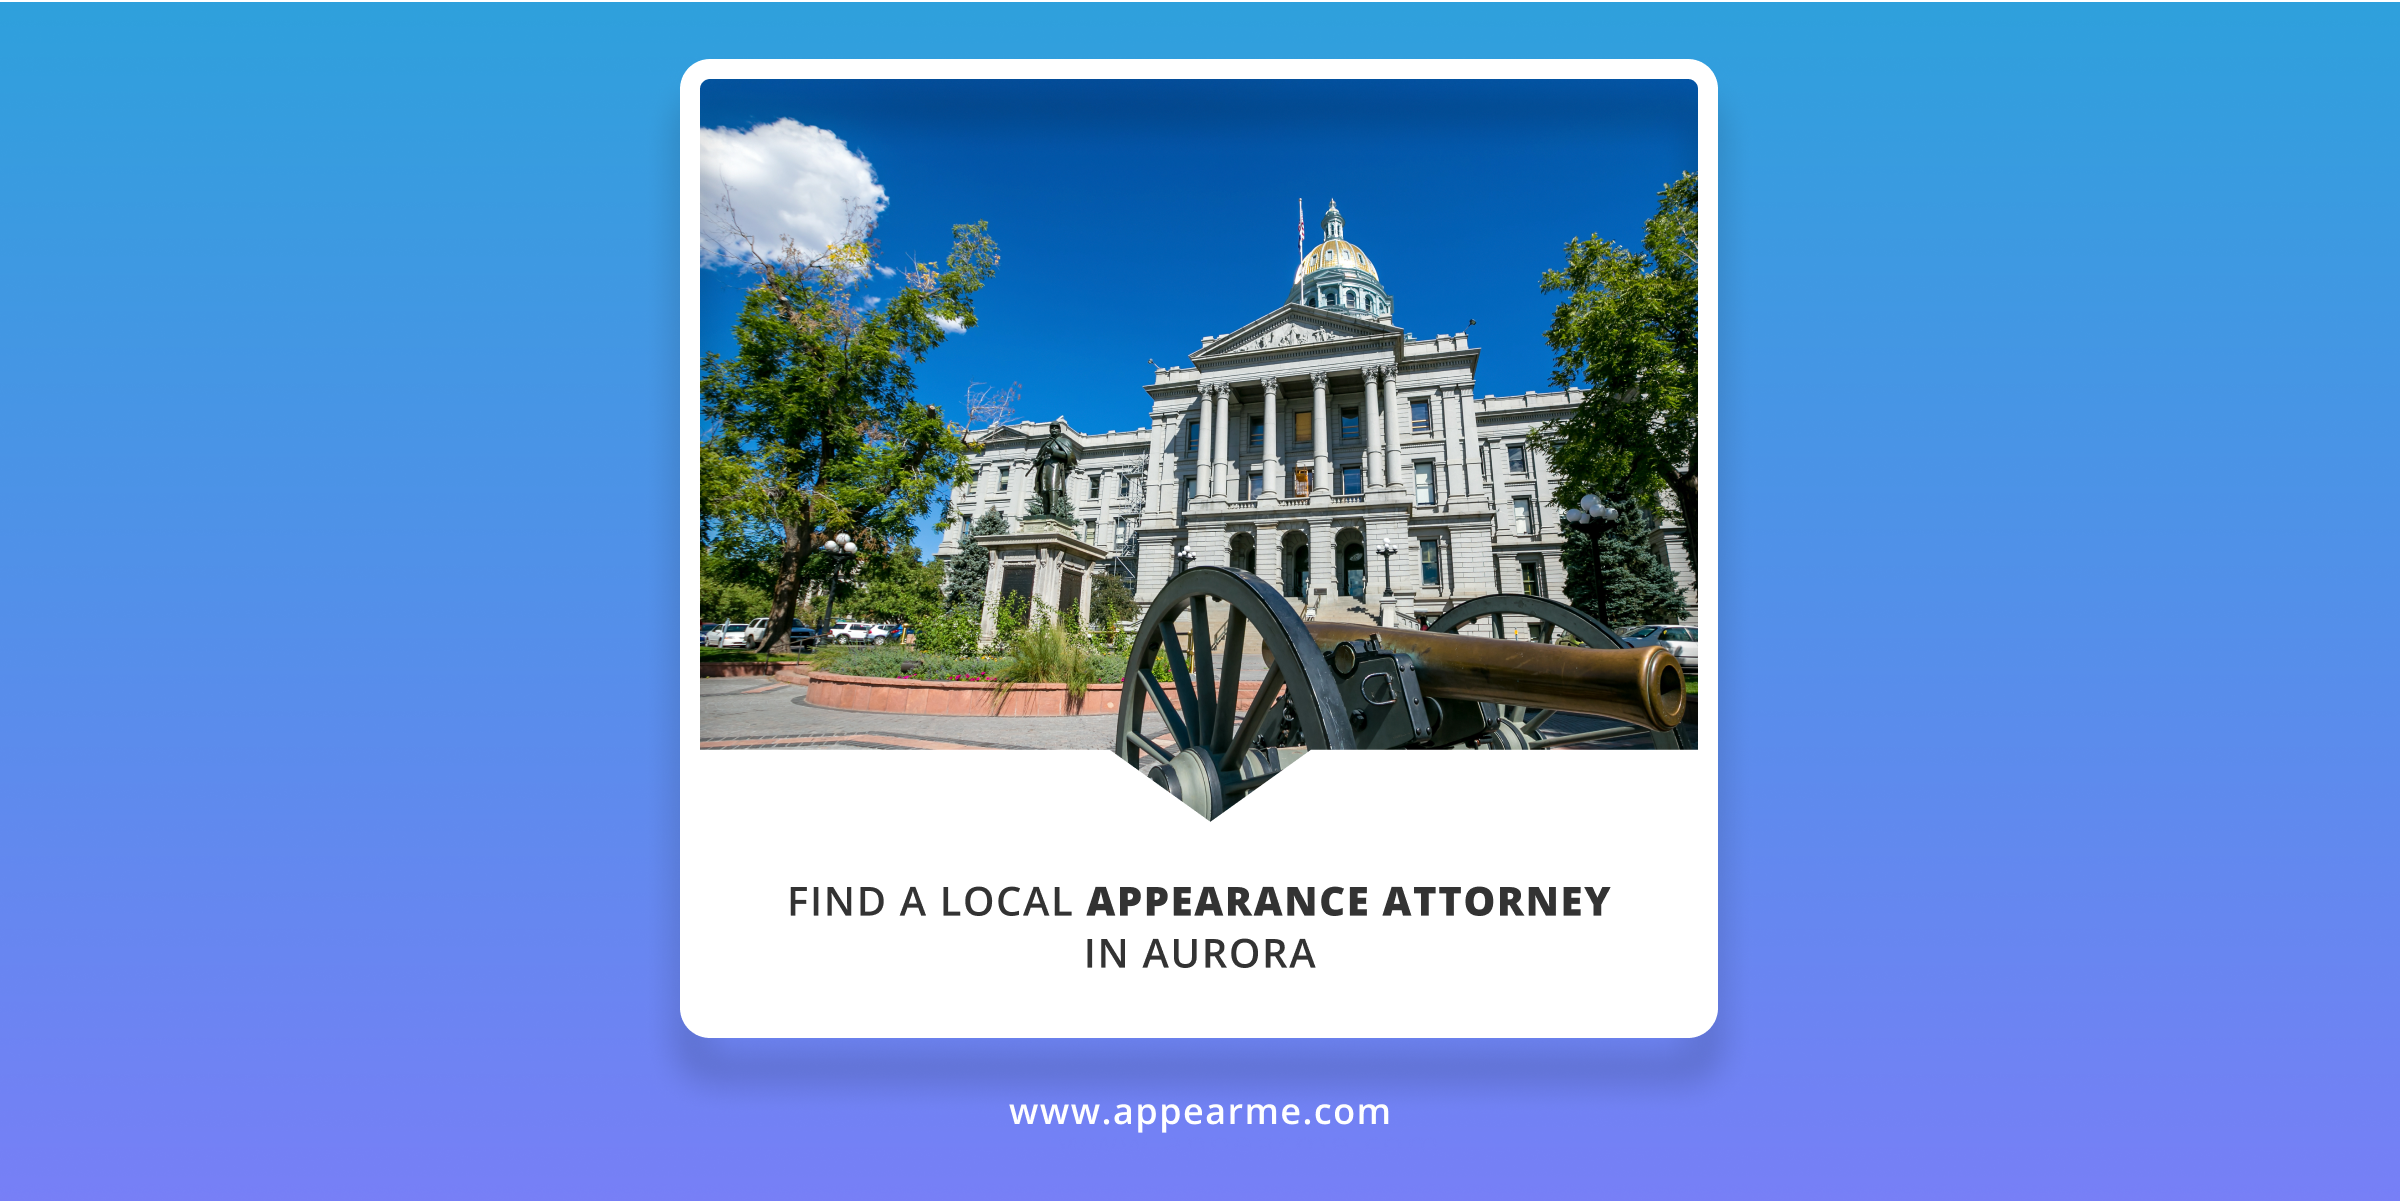 Find a Local Appearance Attorney in Aurora